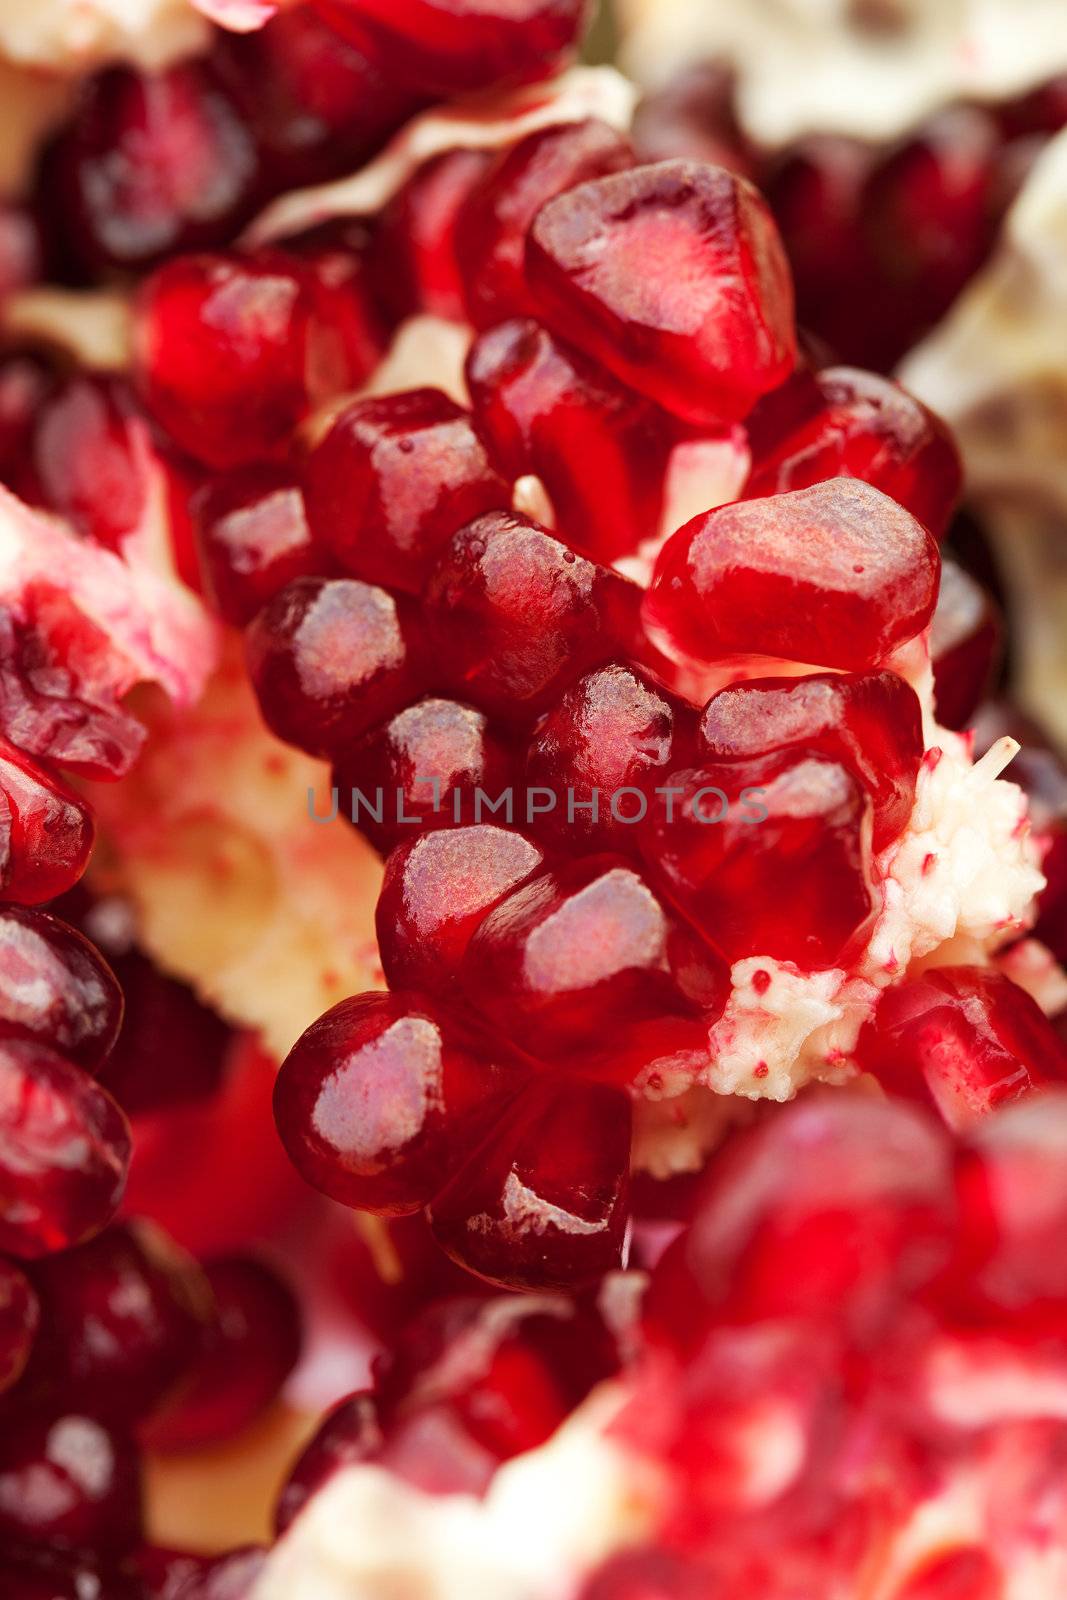 Pomegranate by Gravicapa